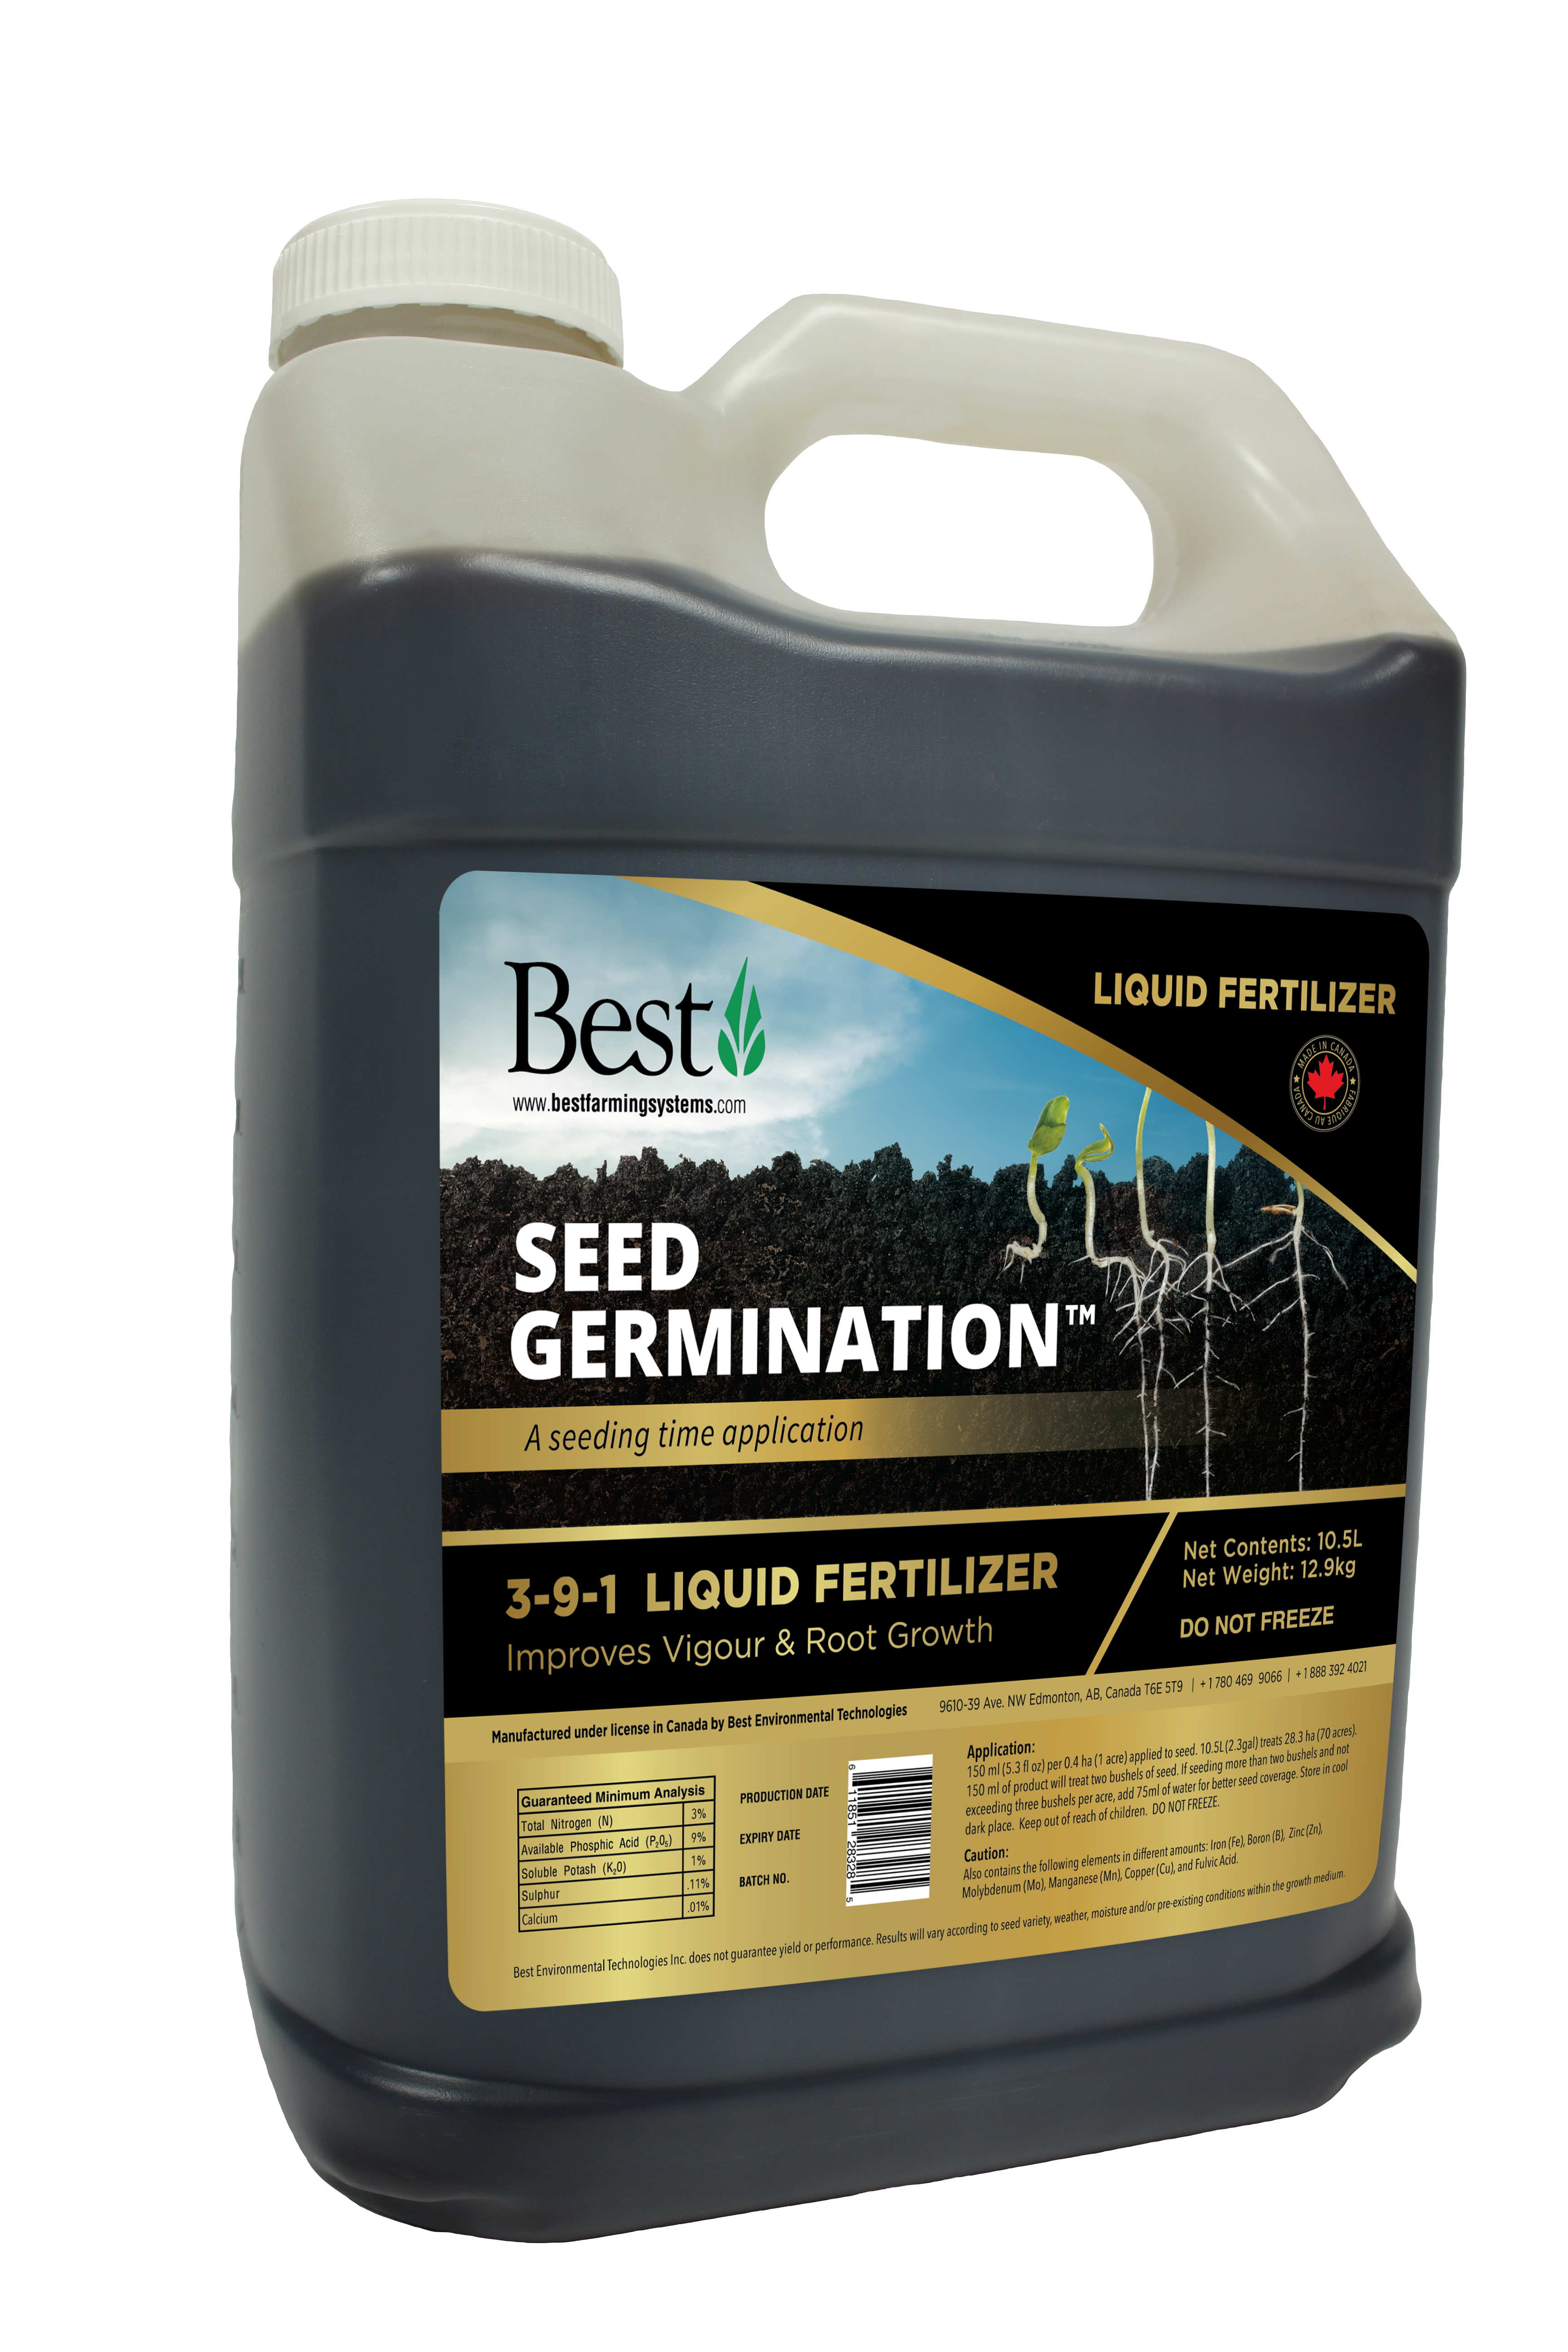 10.5 LSeed treatment for fast emergence and healthy plants